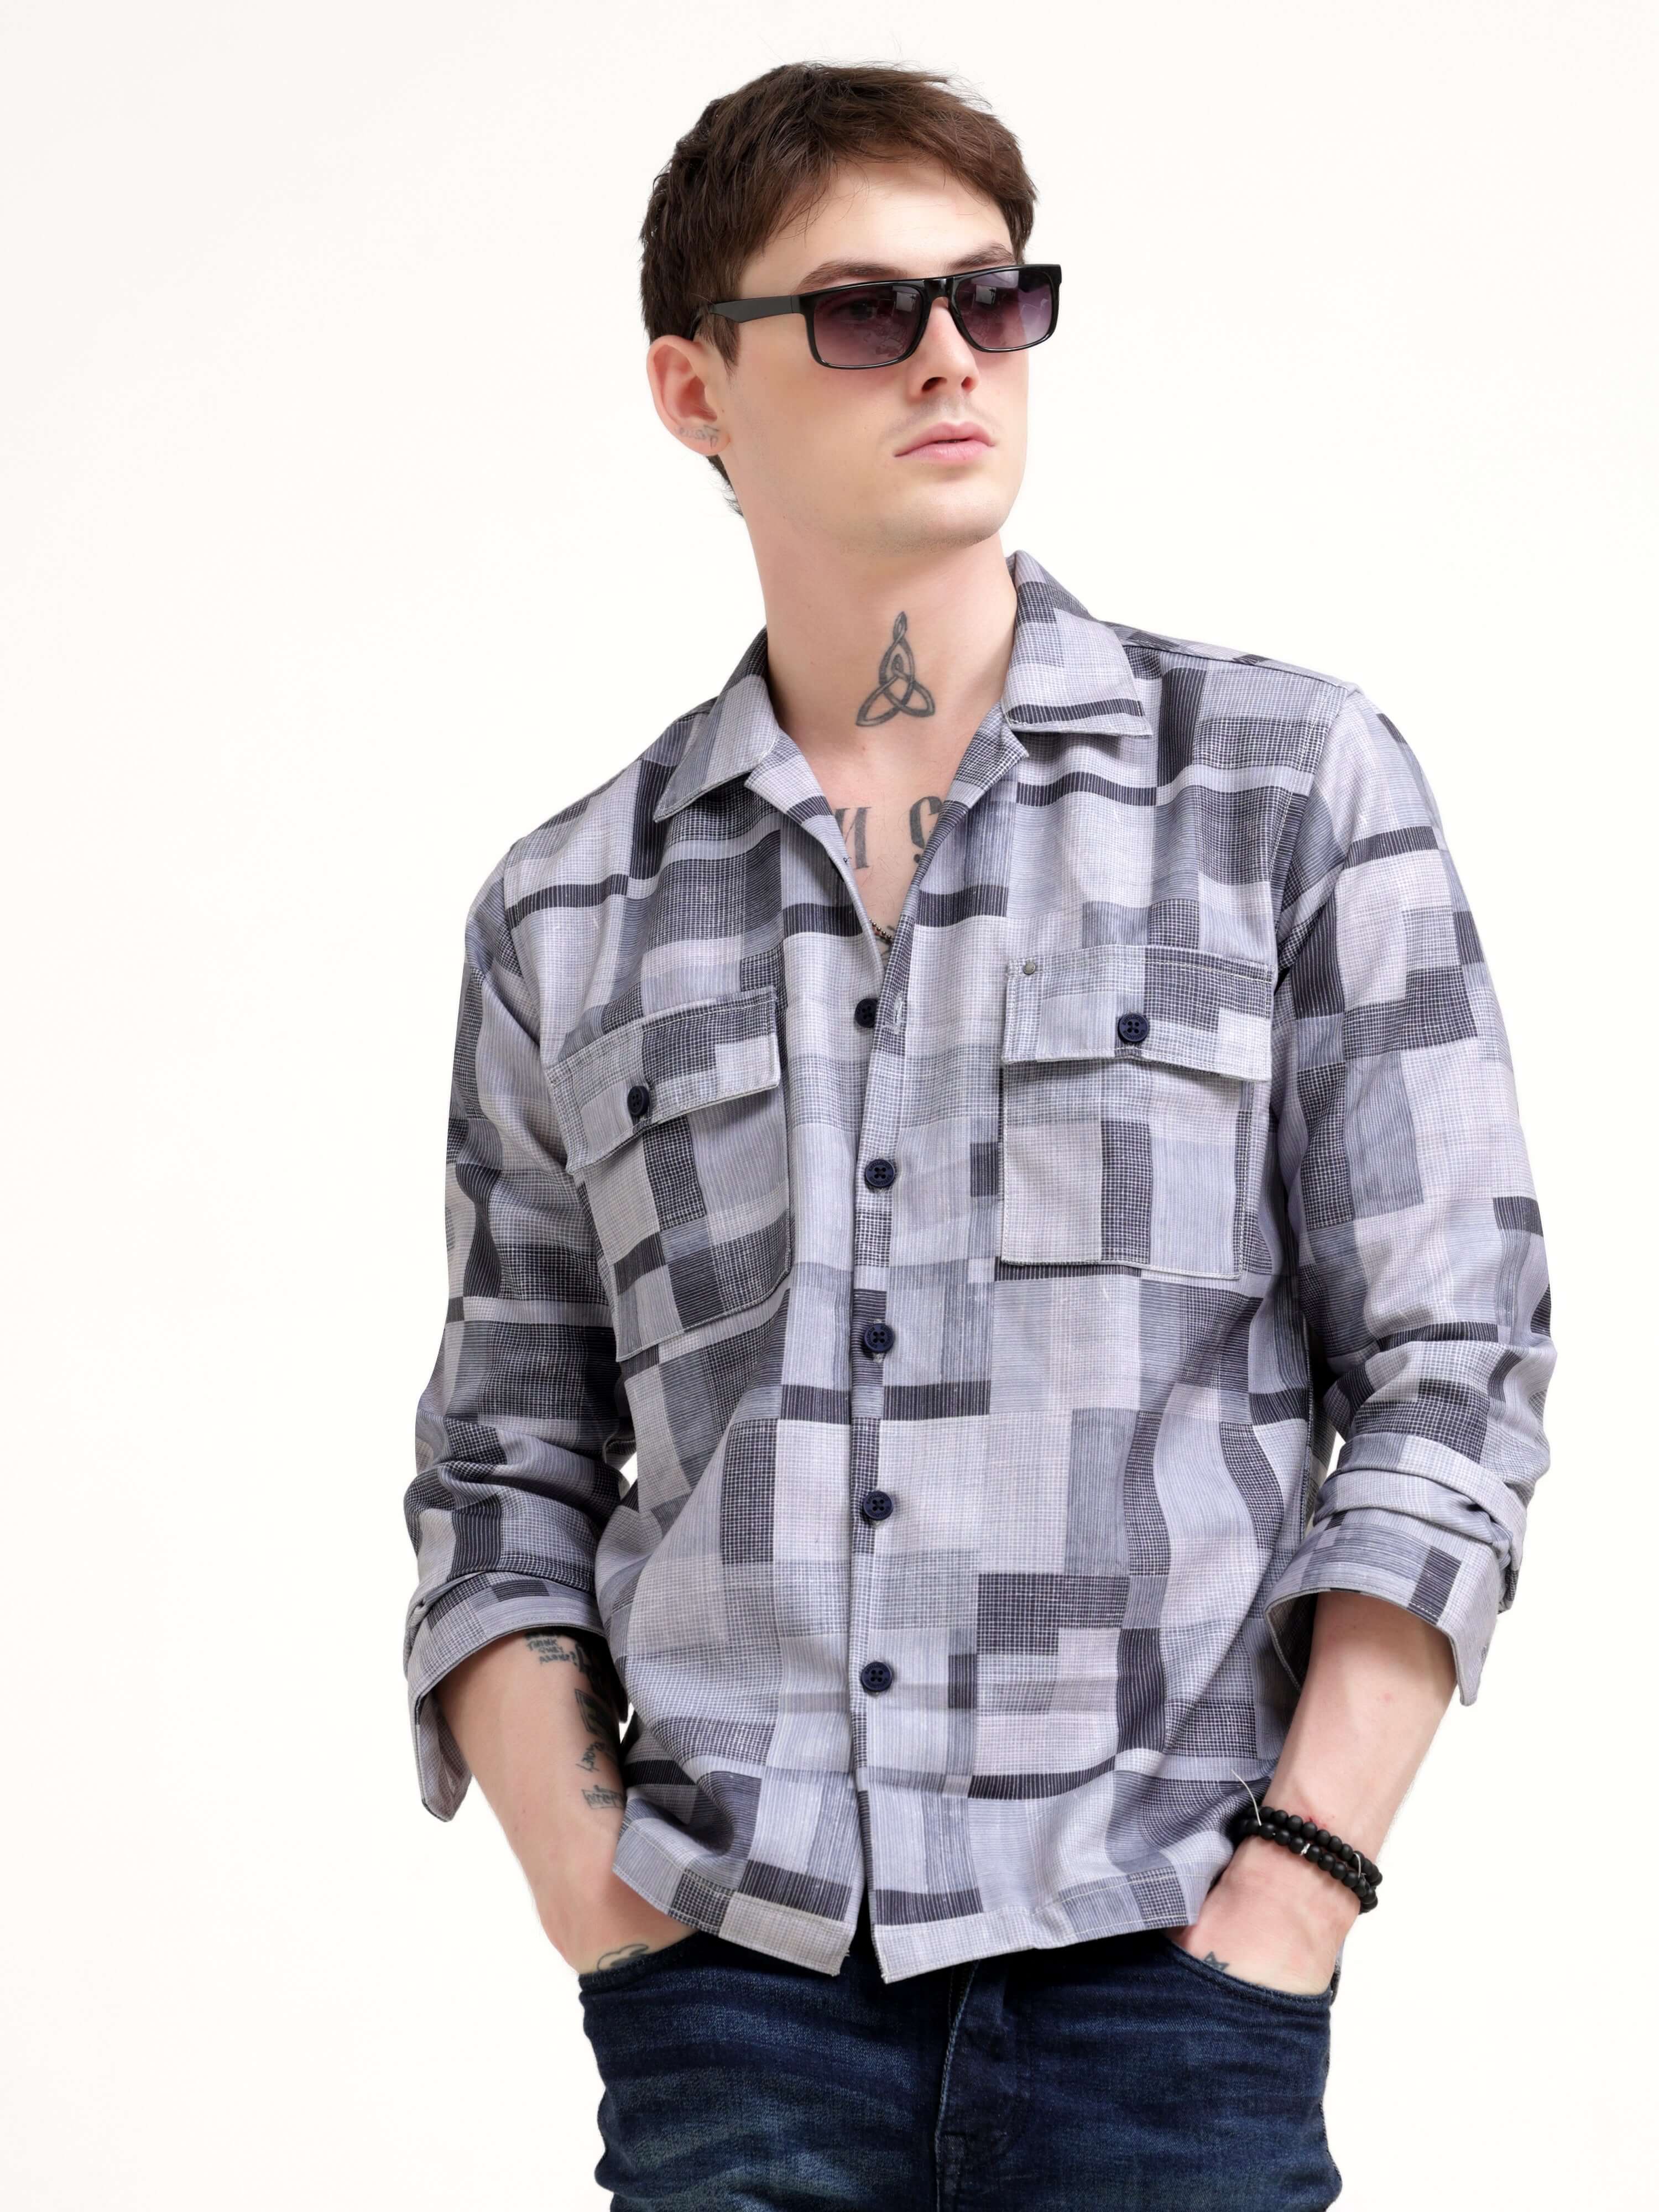 Geovibrance abstract gray Overshirt - Men's Casual Wear shop online at Estilocus. Elevate your wardrobe with the Geovibrance abstract gray Overshirt. Perfect for any casual occasion, its modern fit ensures comfort & style.